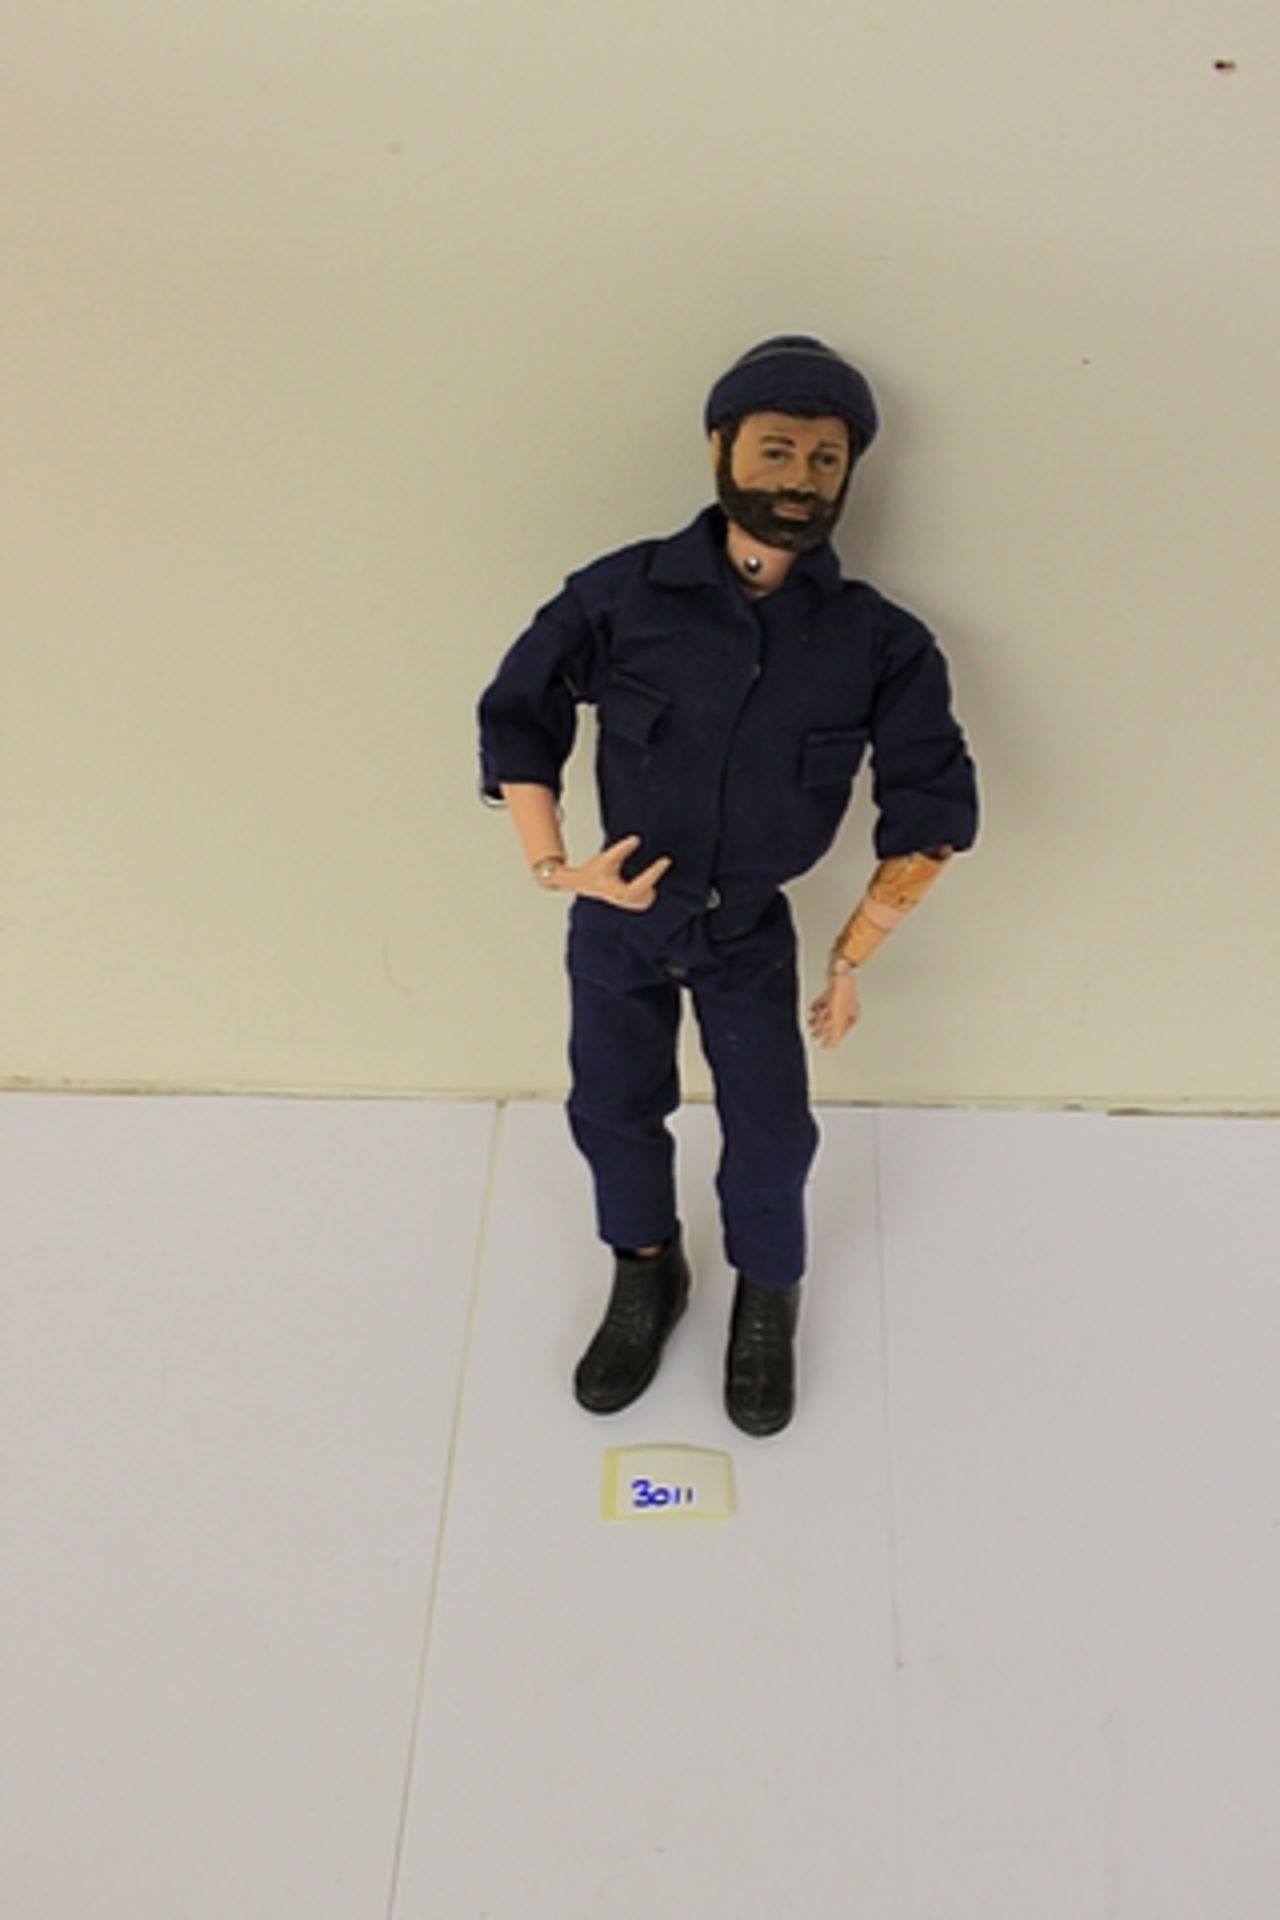 Vintage Action Man Figure With Navy Outfit